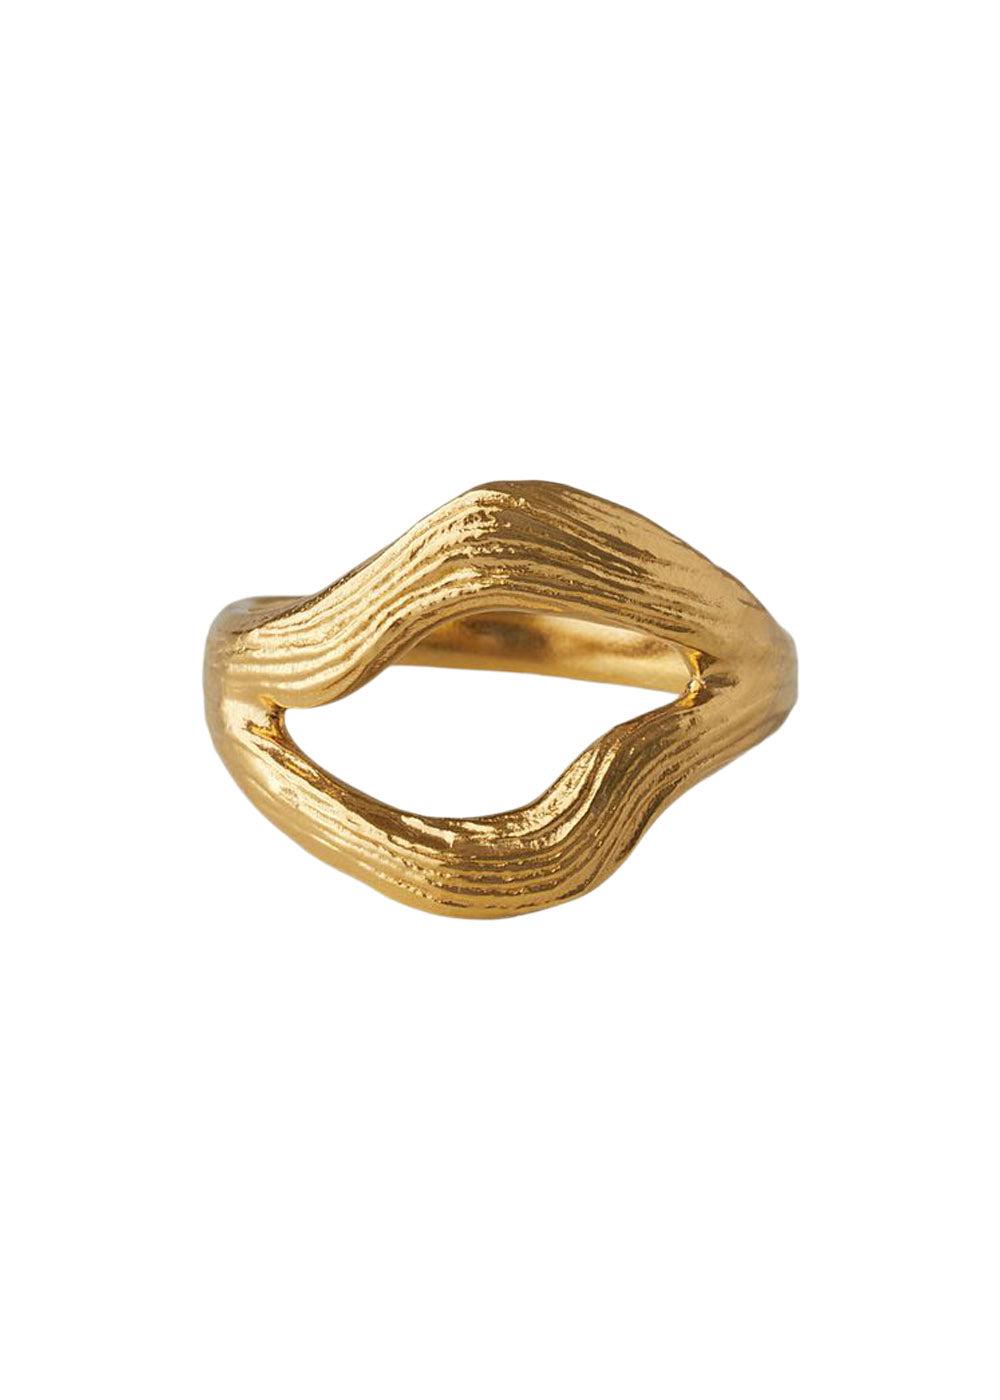 Flowing Dreams Ring - Gold